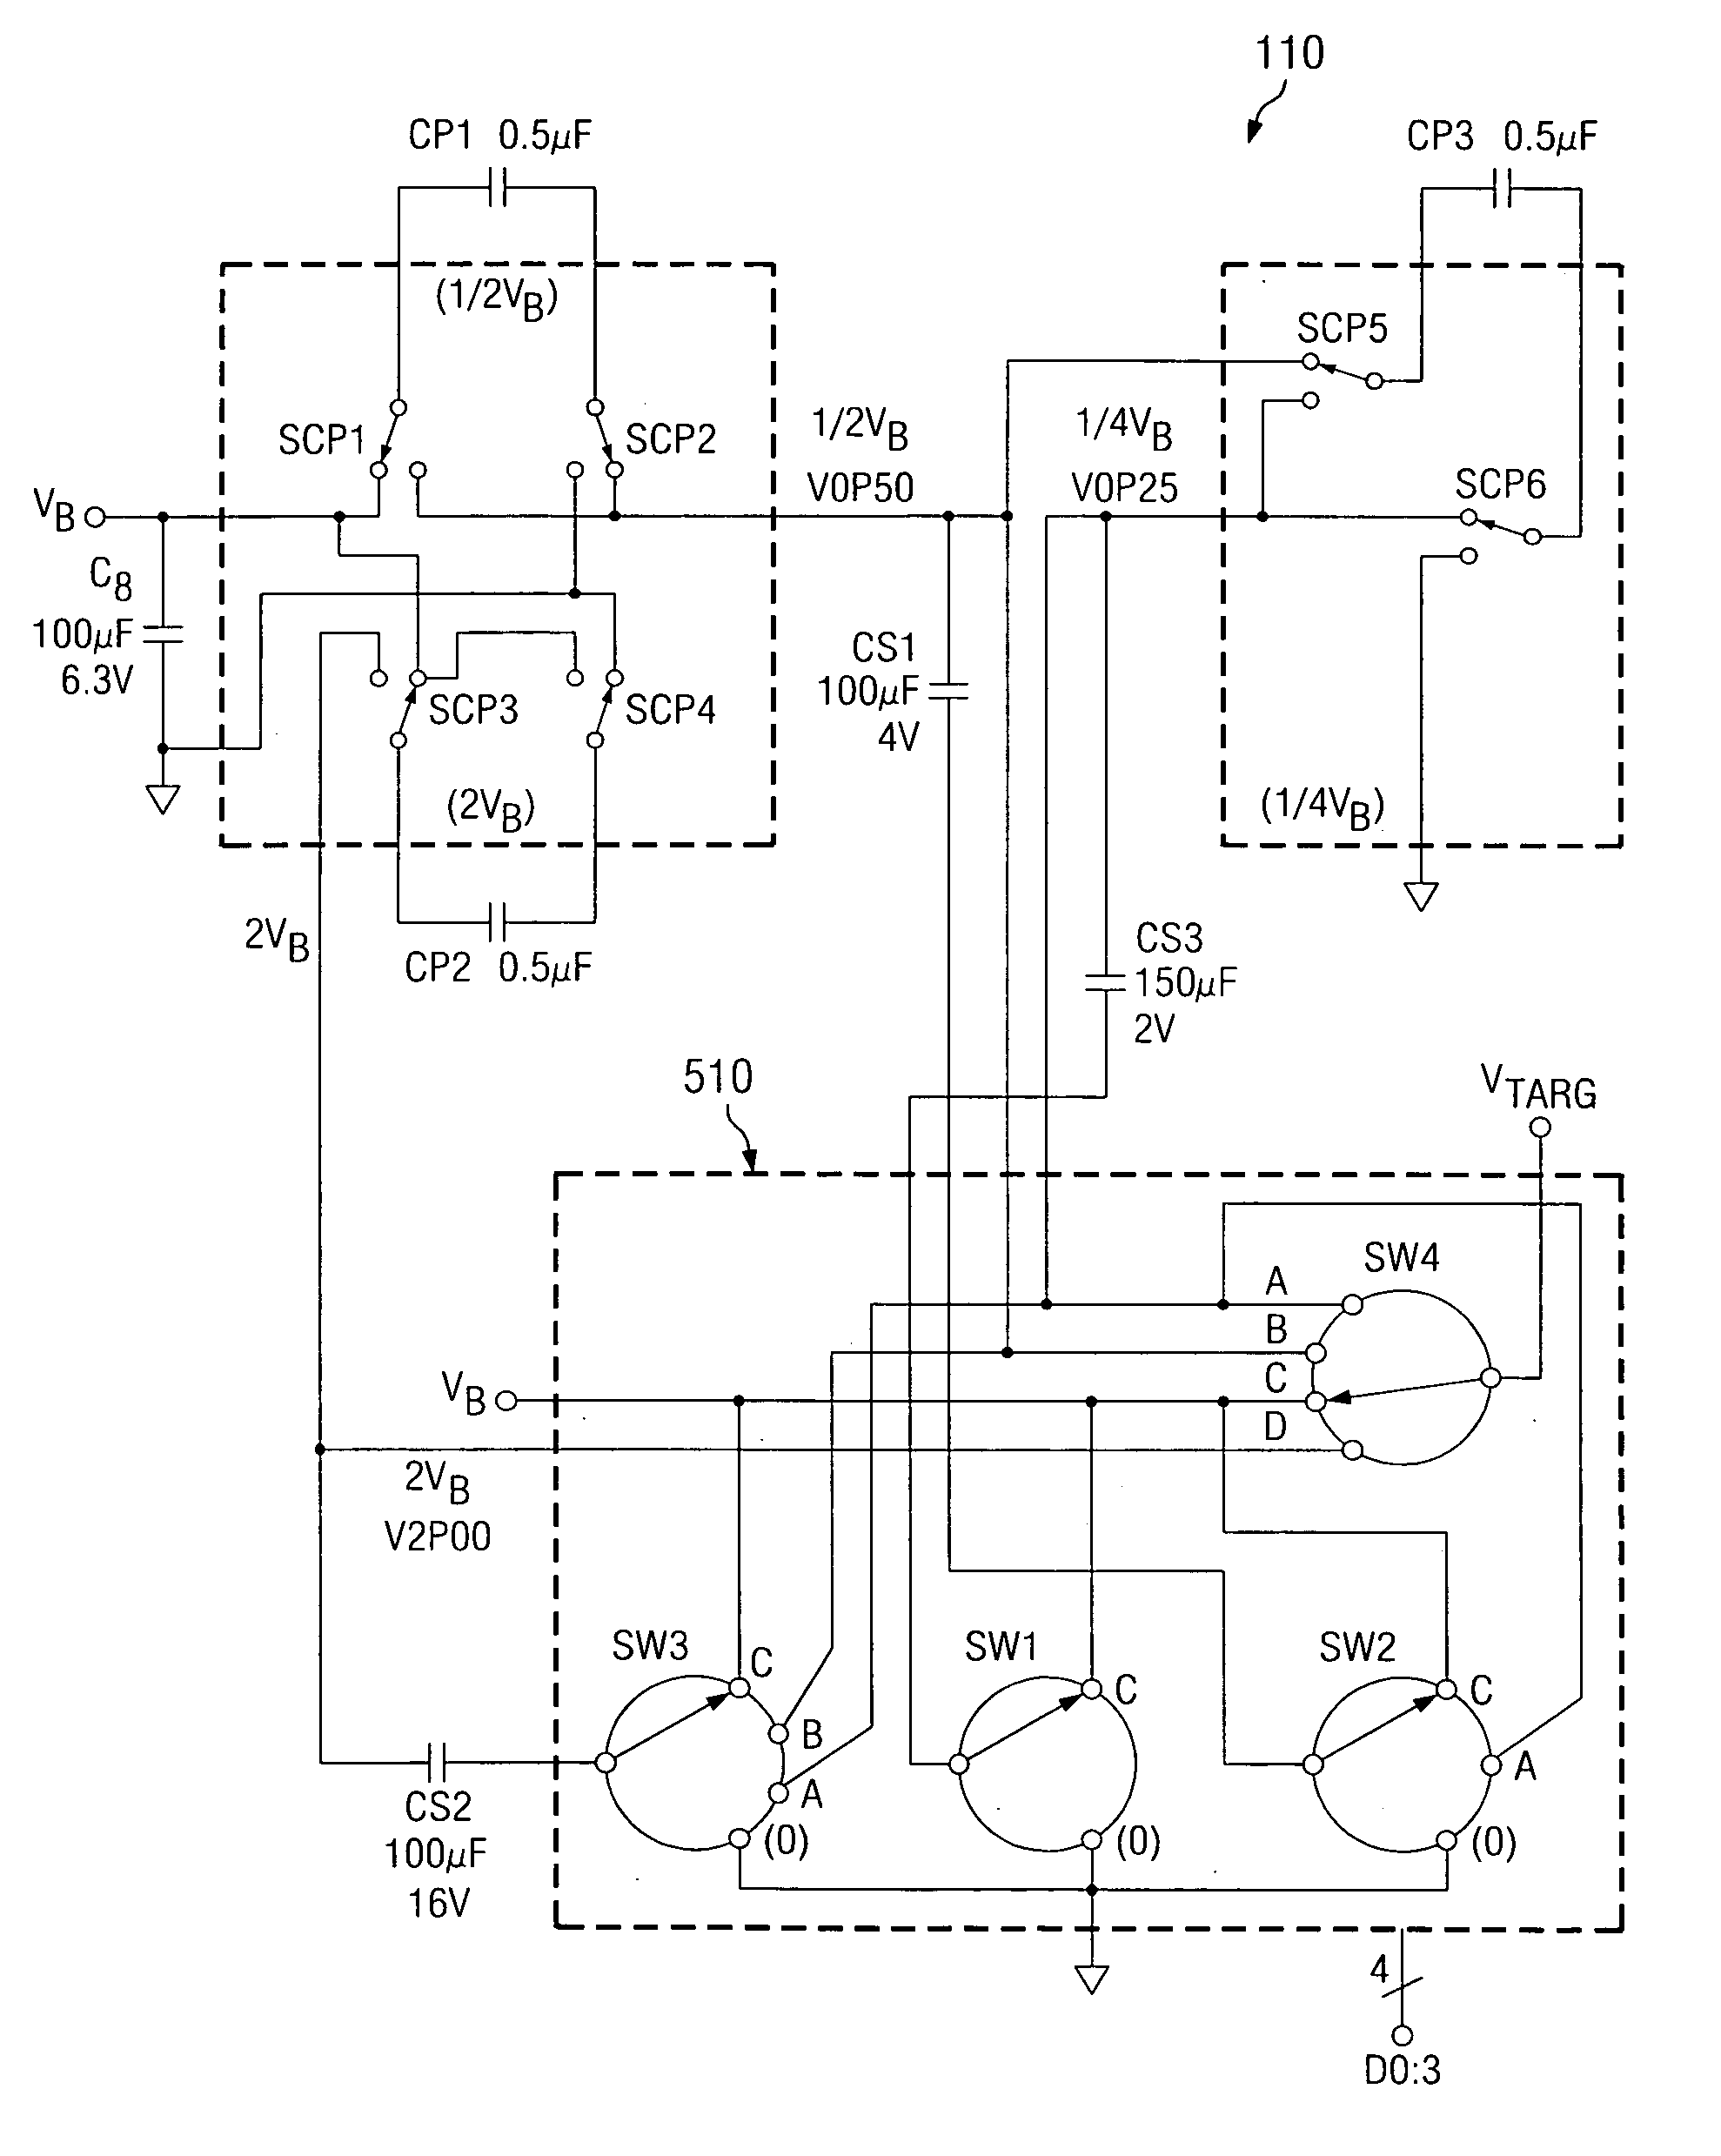 Pulse generator having an efficient fractional voltage converter and method of use